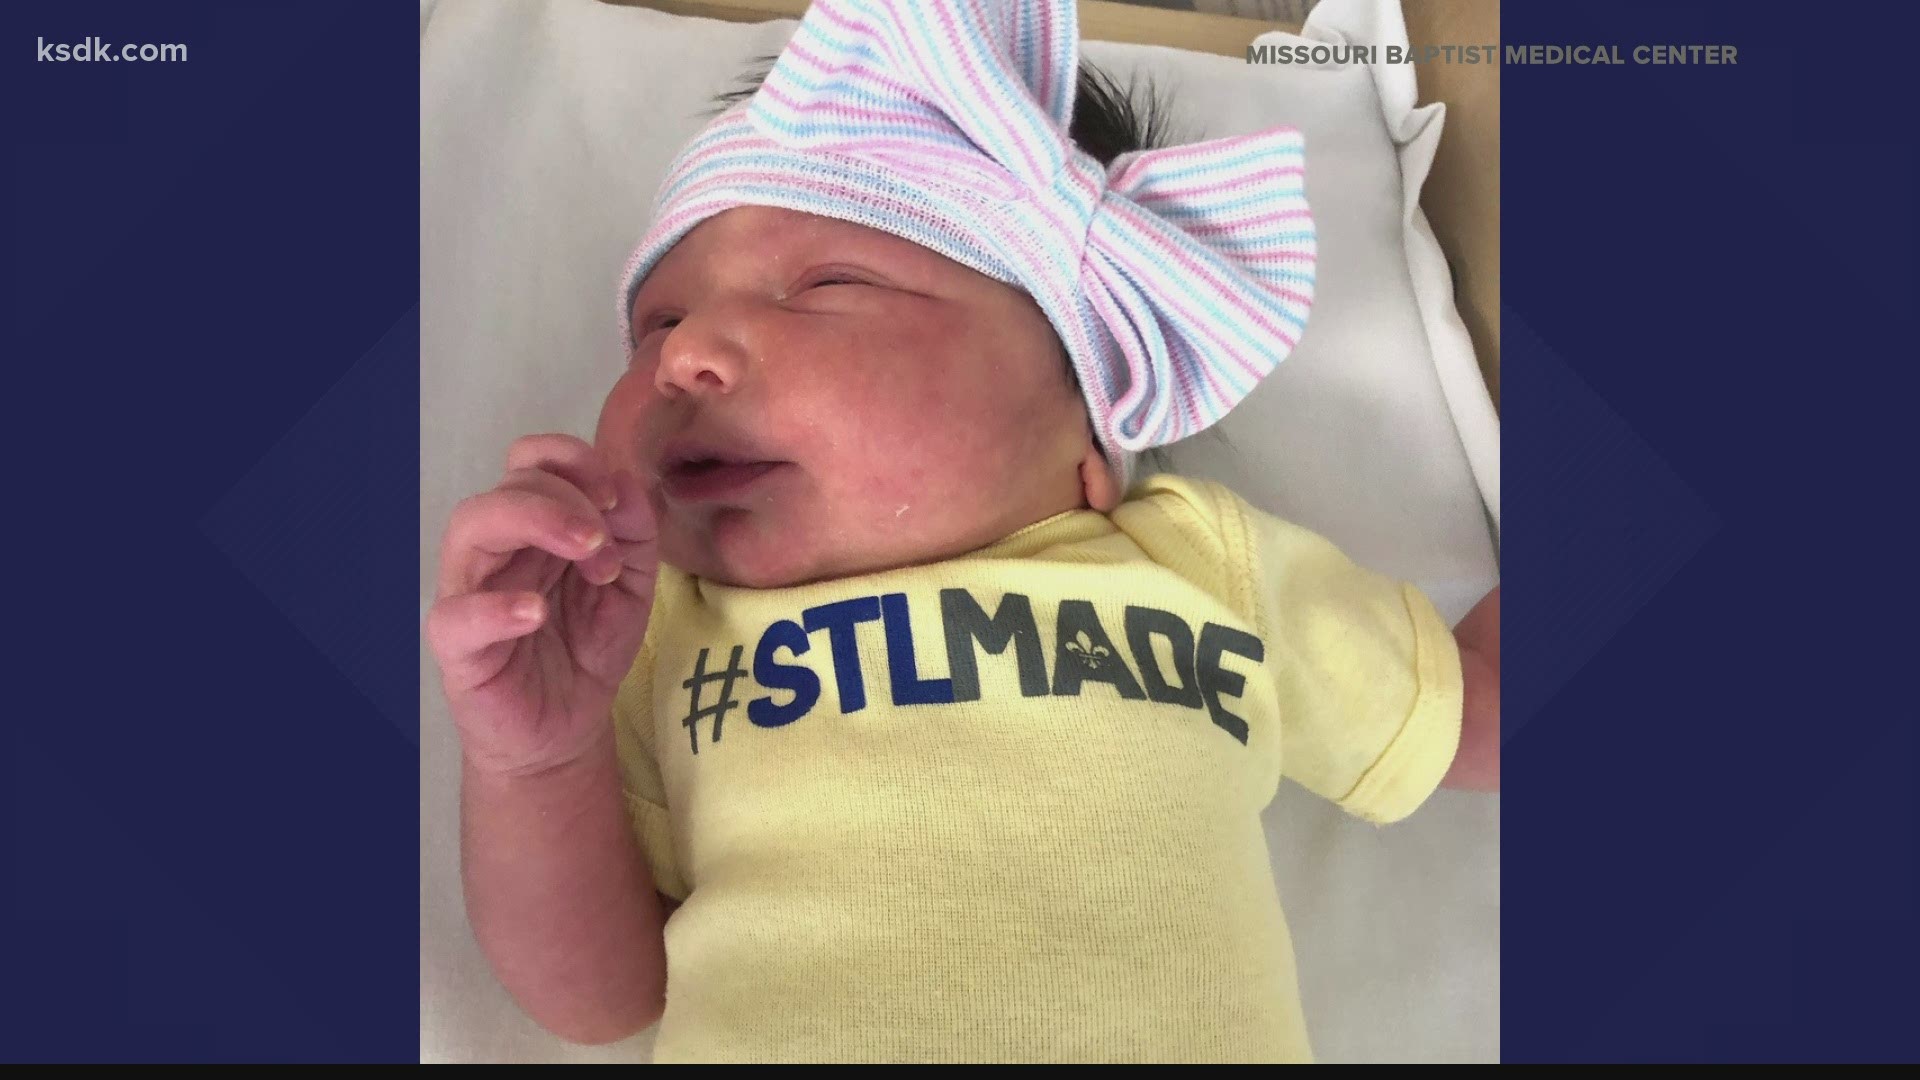 The nurses at Missouri Baptist decked these newborns out in "STL Made" onesies